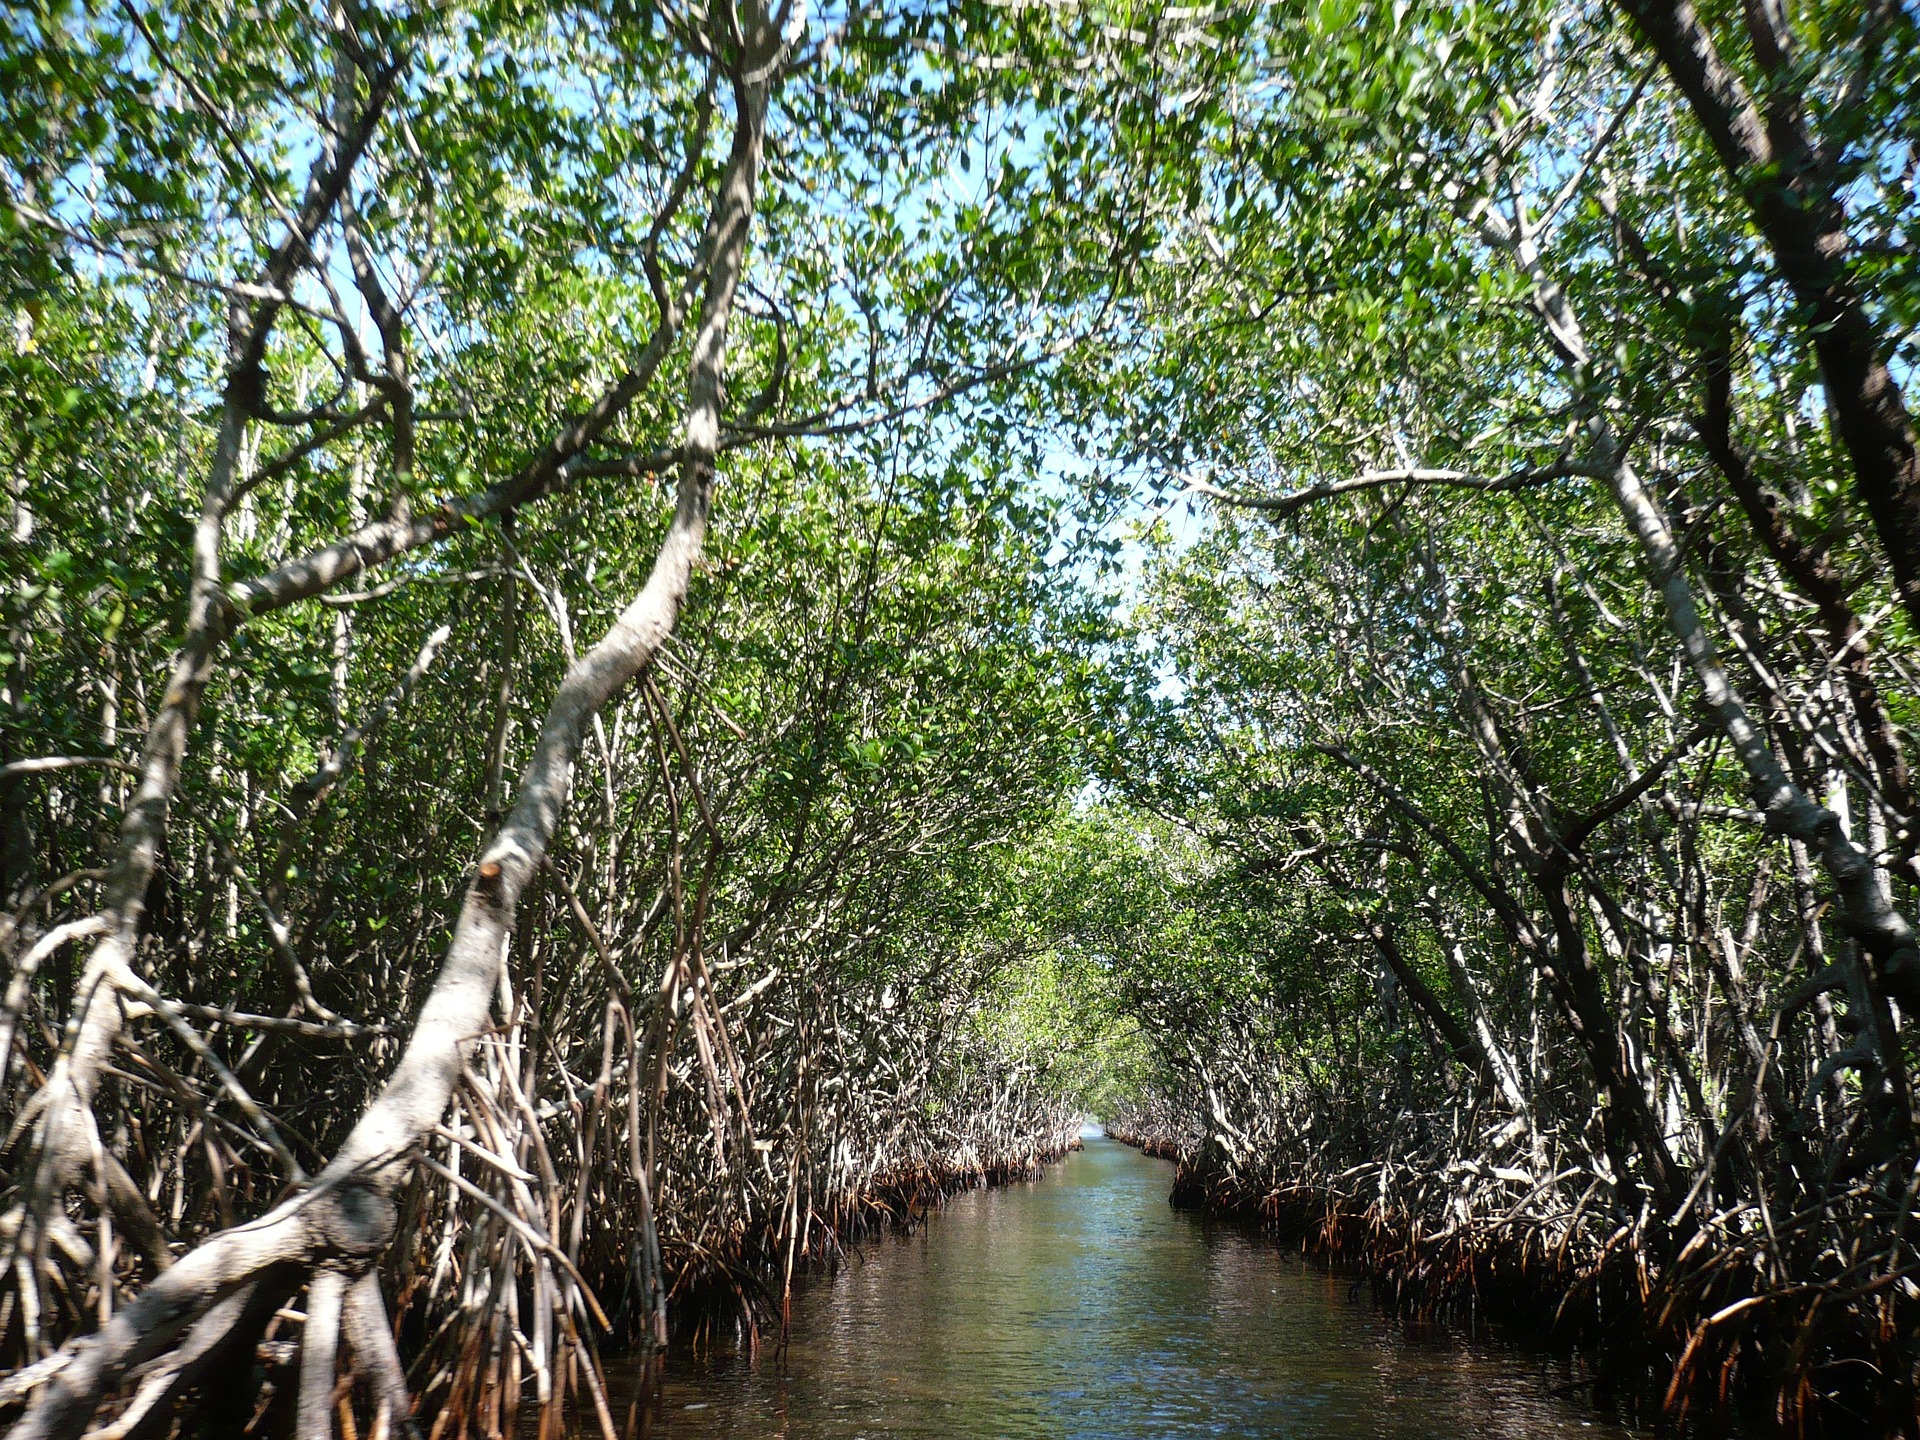 Healthy ecosystems are nature’s barrier to hurricane damage